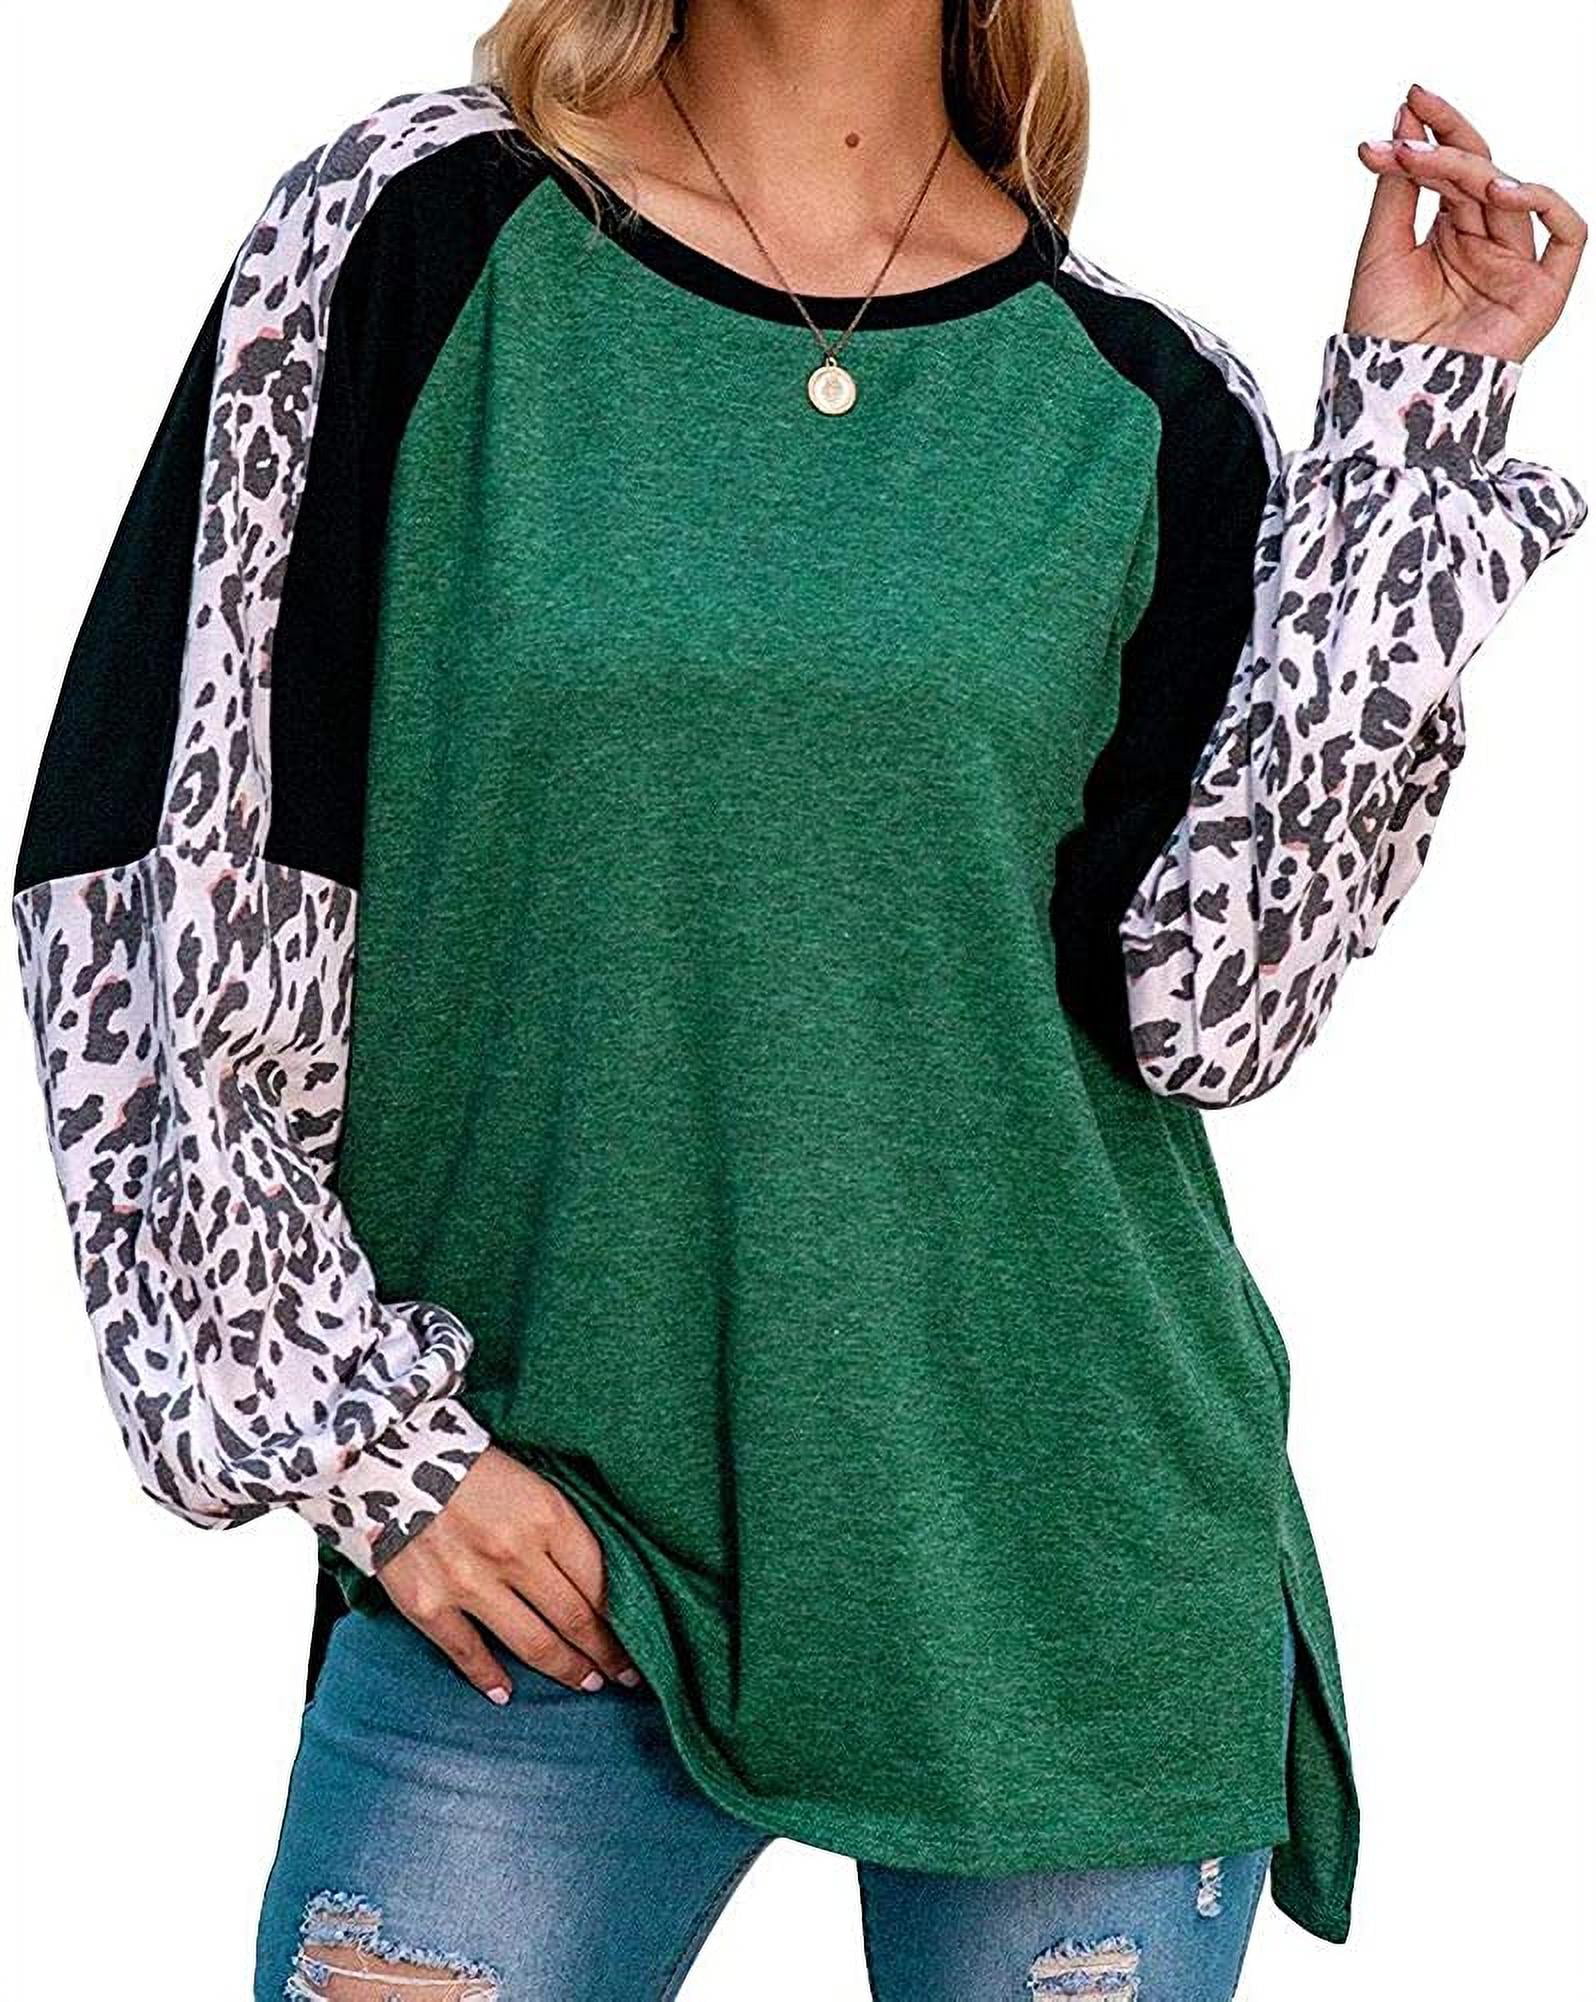 Timeshow Girls sweatshirts long sleeve floral printed round neck pullover tops